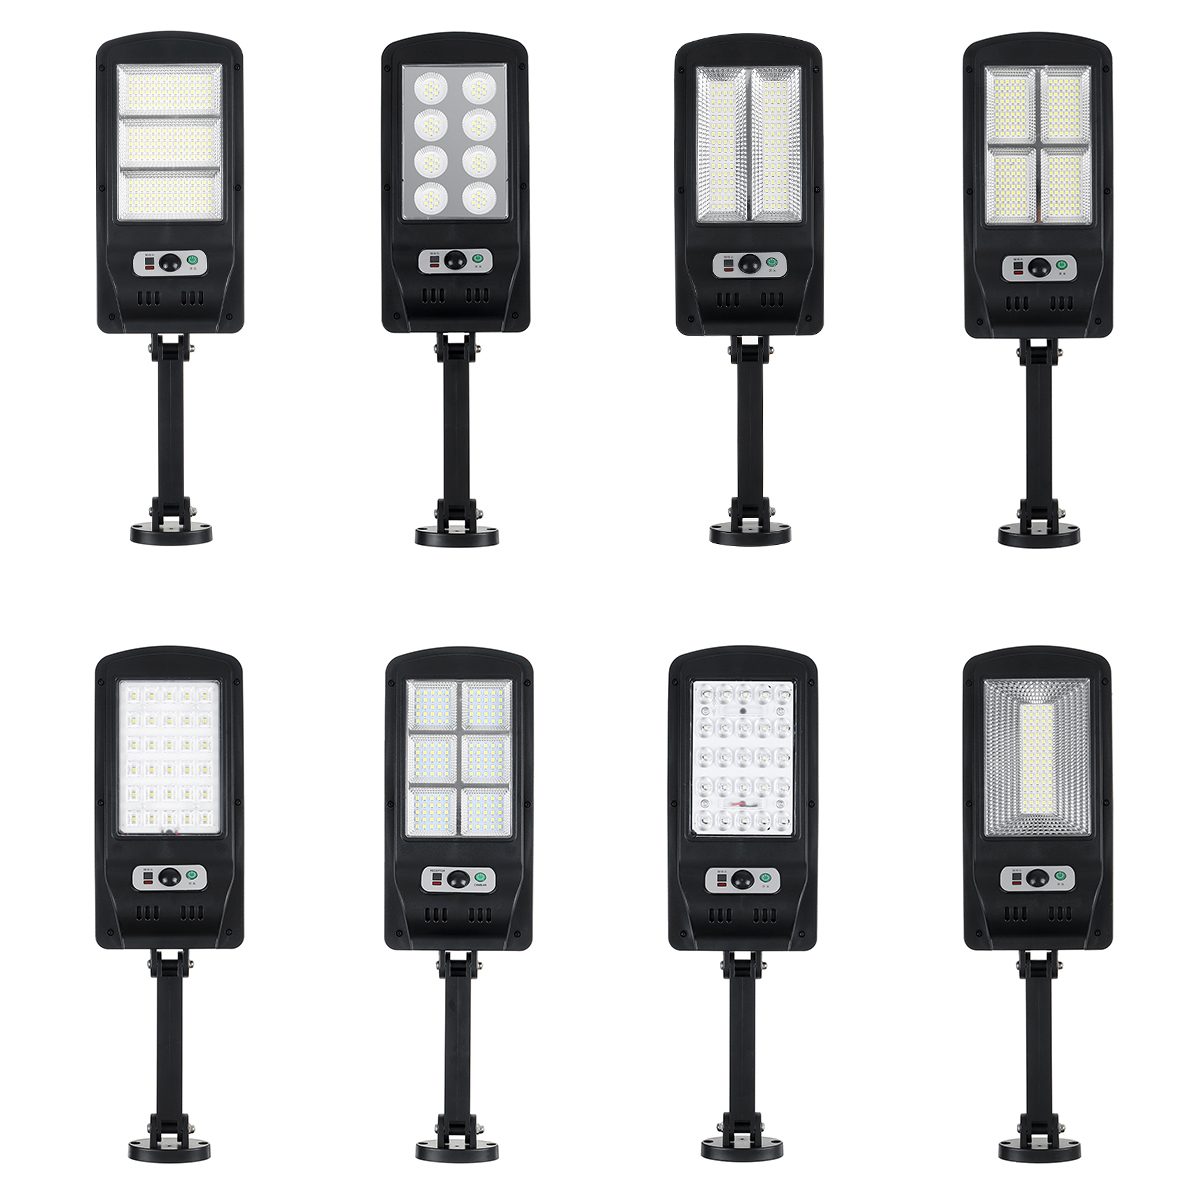 Find LED Solar Wall Light Garden Security Lamp PIR Motion Sensor IP65 Remote Control for Sale on Gipsybee.com with cryptocurrencies